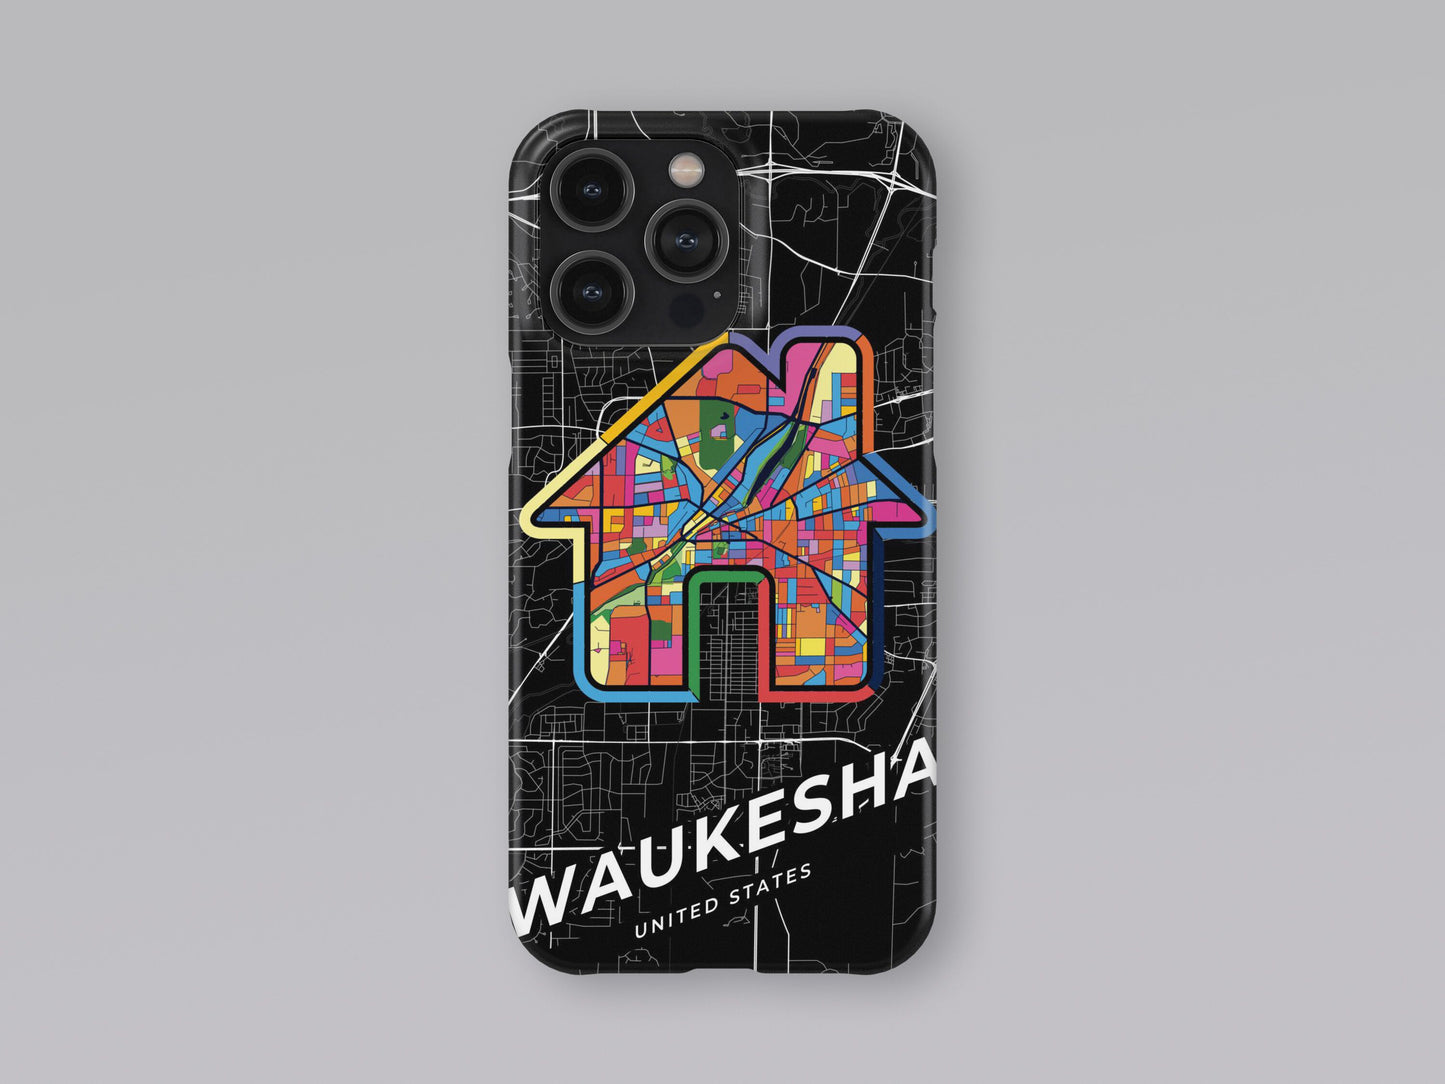 Waukesha Wisconsin slim phone case with colorful icon 3